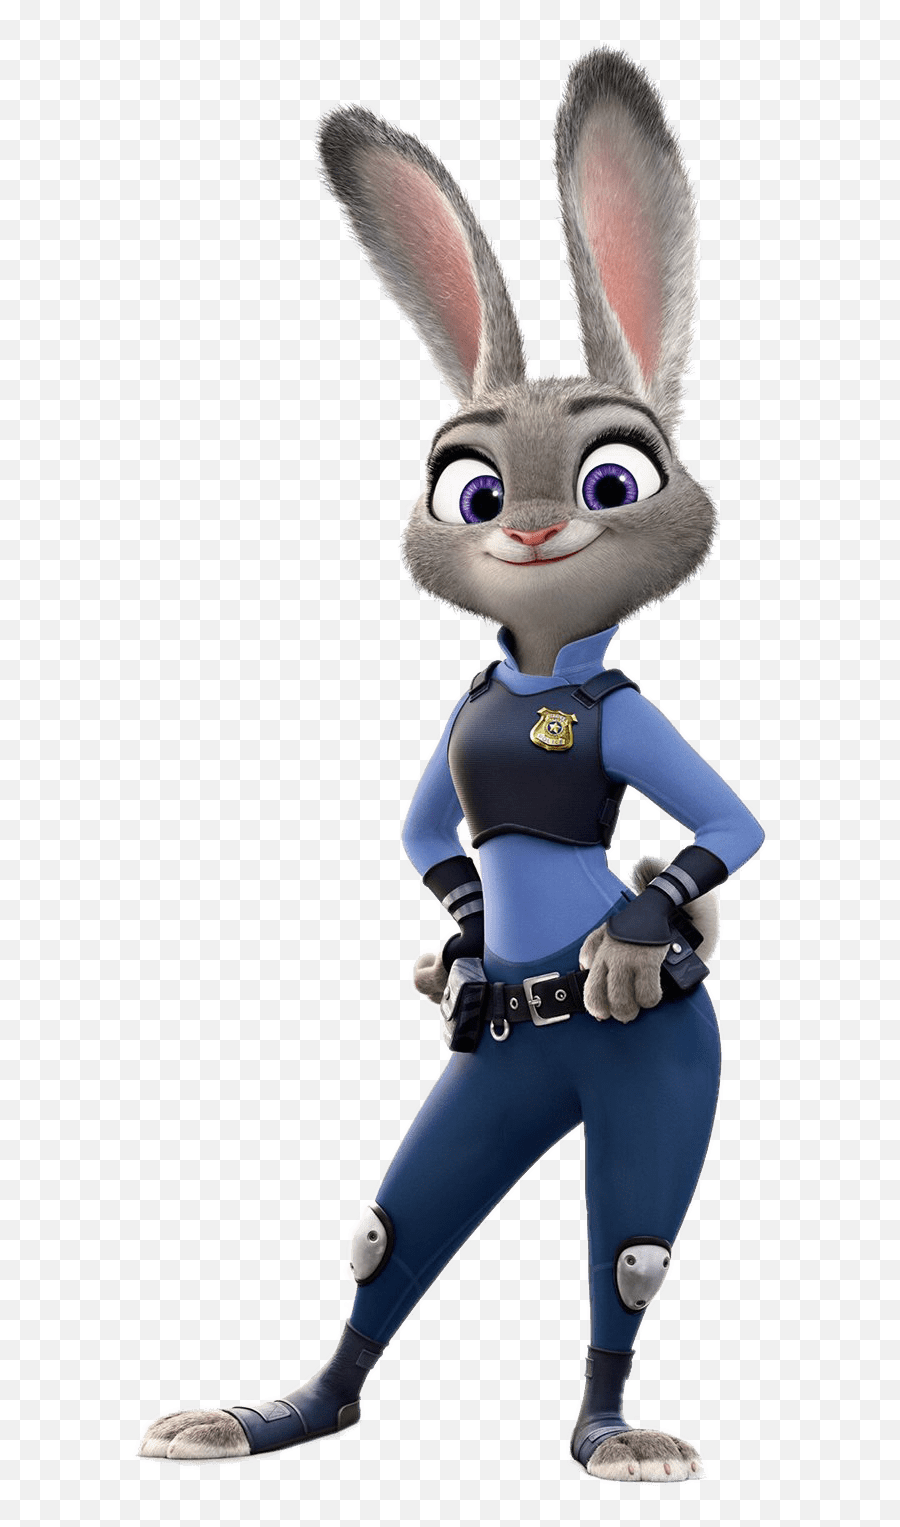 Zootopia Judy Hopps Transparent Png - Judy Hopps,Zootopia Png